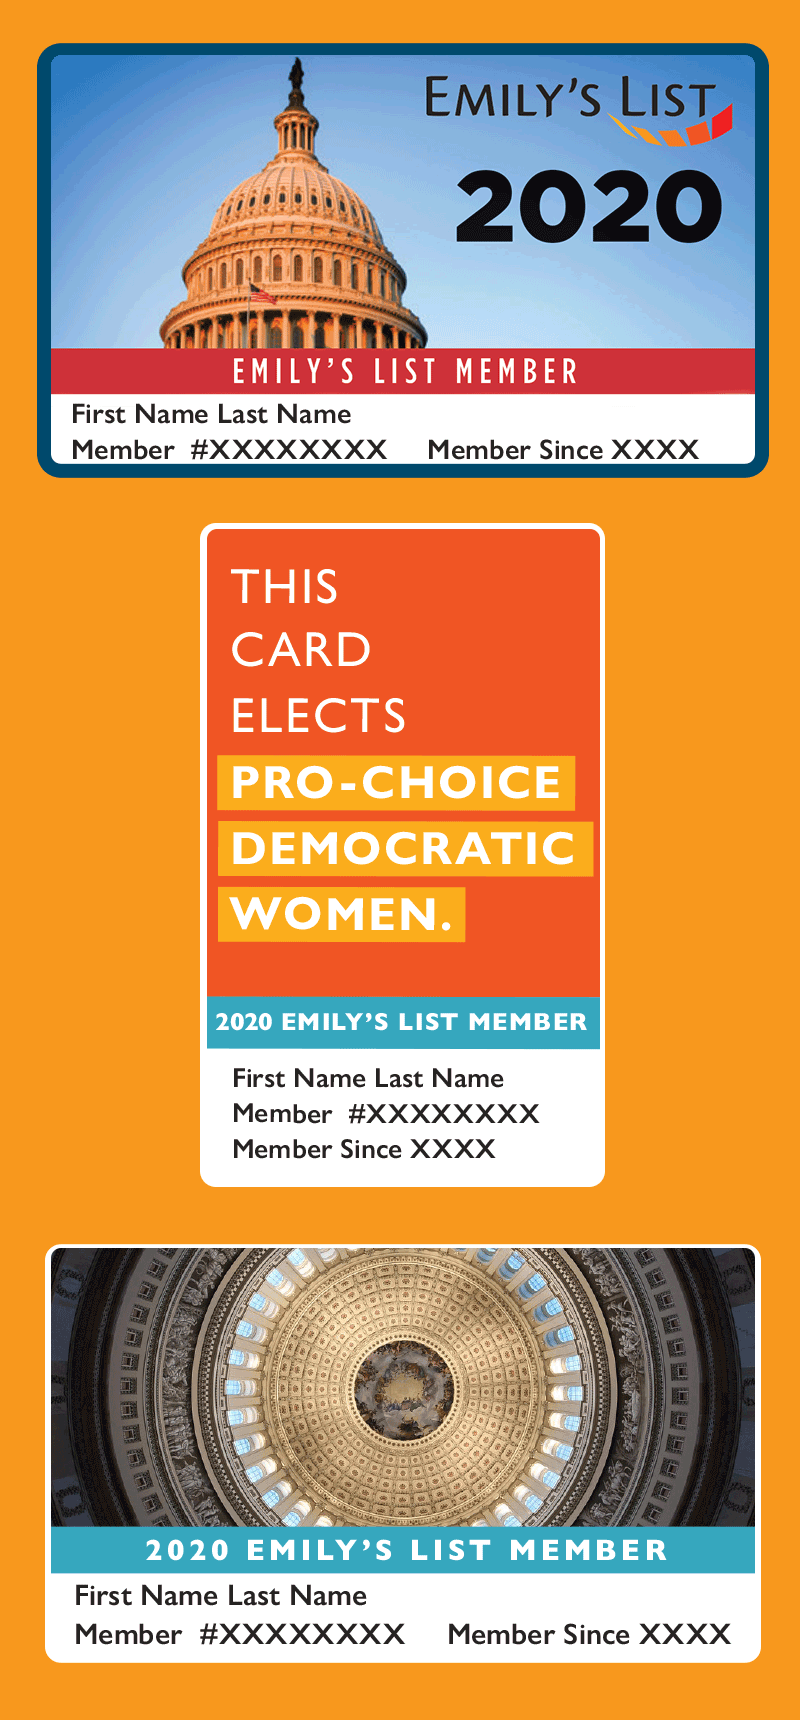 Gold interior of capitol dome; This card elects pro-choice Democratic women;
Capitol dome exterior